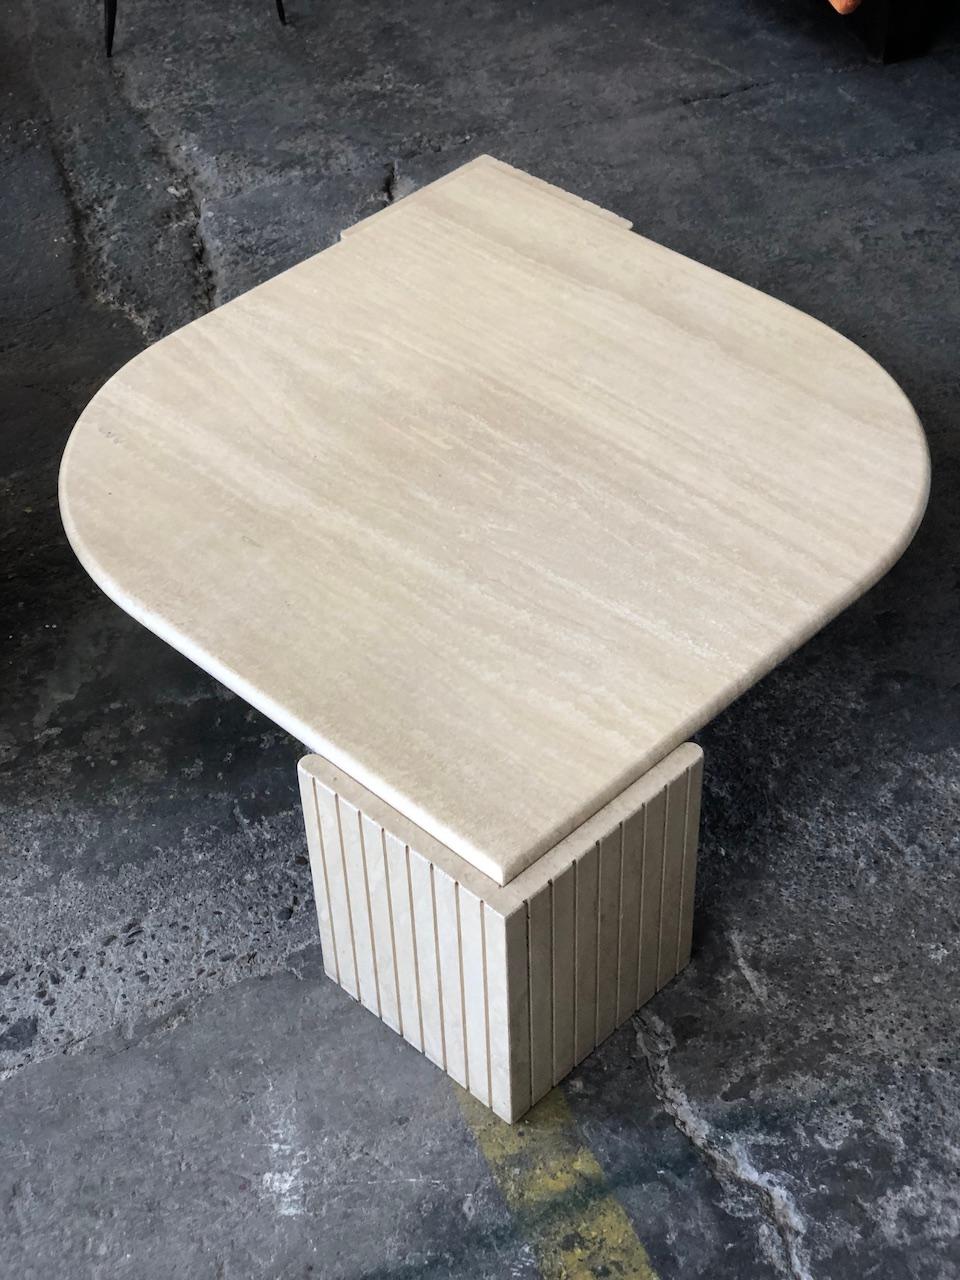 Roche Bobois 1970 travertine coffee table in the shape of an eye. The top rests on 2 independent legs.
In a perfect condition 
Tray 3cm.